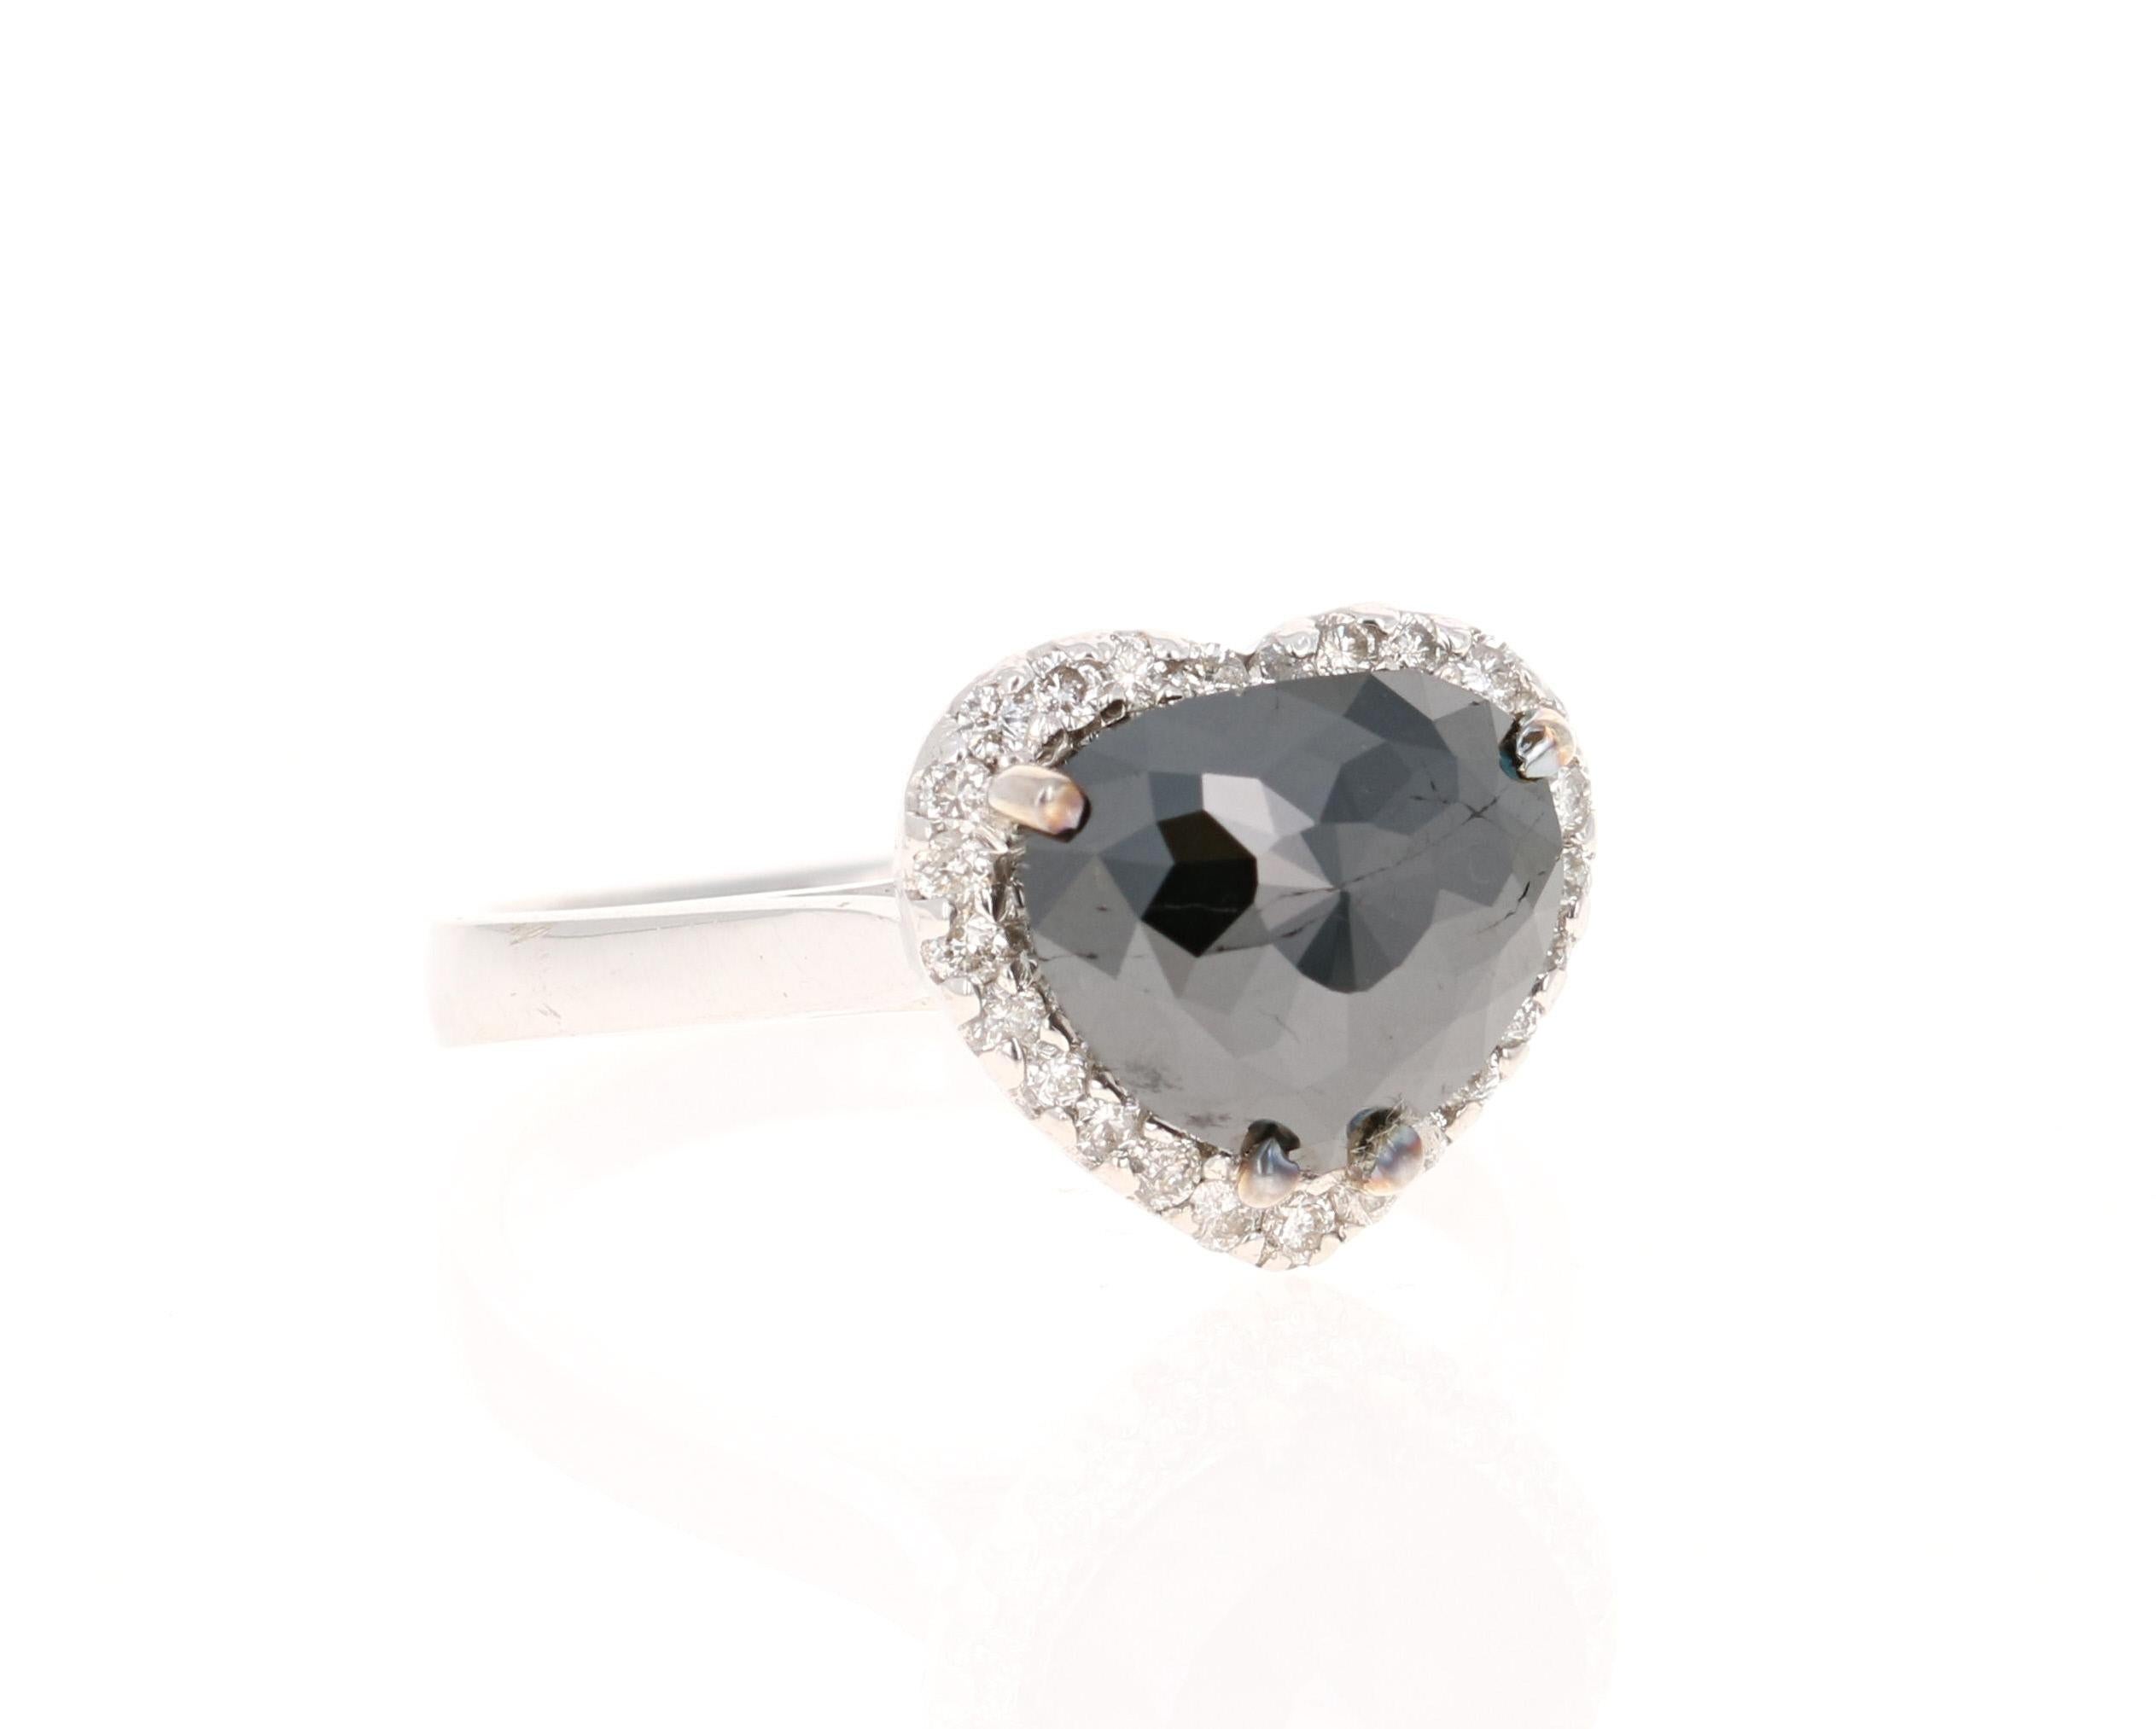 This heart cut Black Diamond weighs 2.07 carats and is surrounded by 25 Round Cut Diamonds that weigh 0.27 carats. The total carat weight of the ring is 2.34 carats. 

The Black Diamond are natural diamonds that have been color-treated to give them